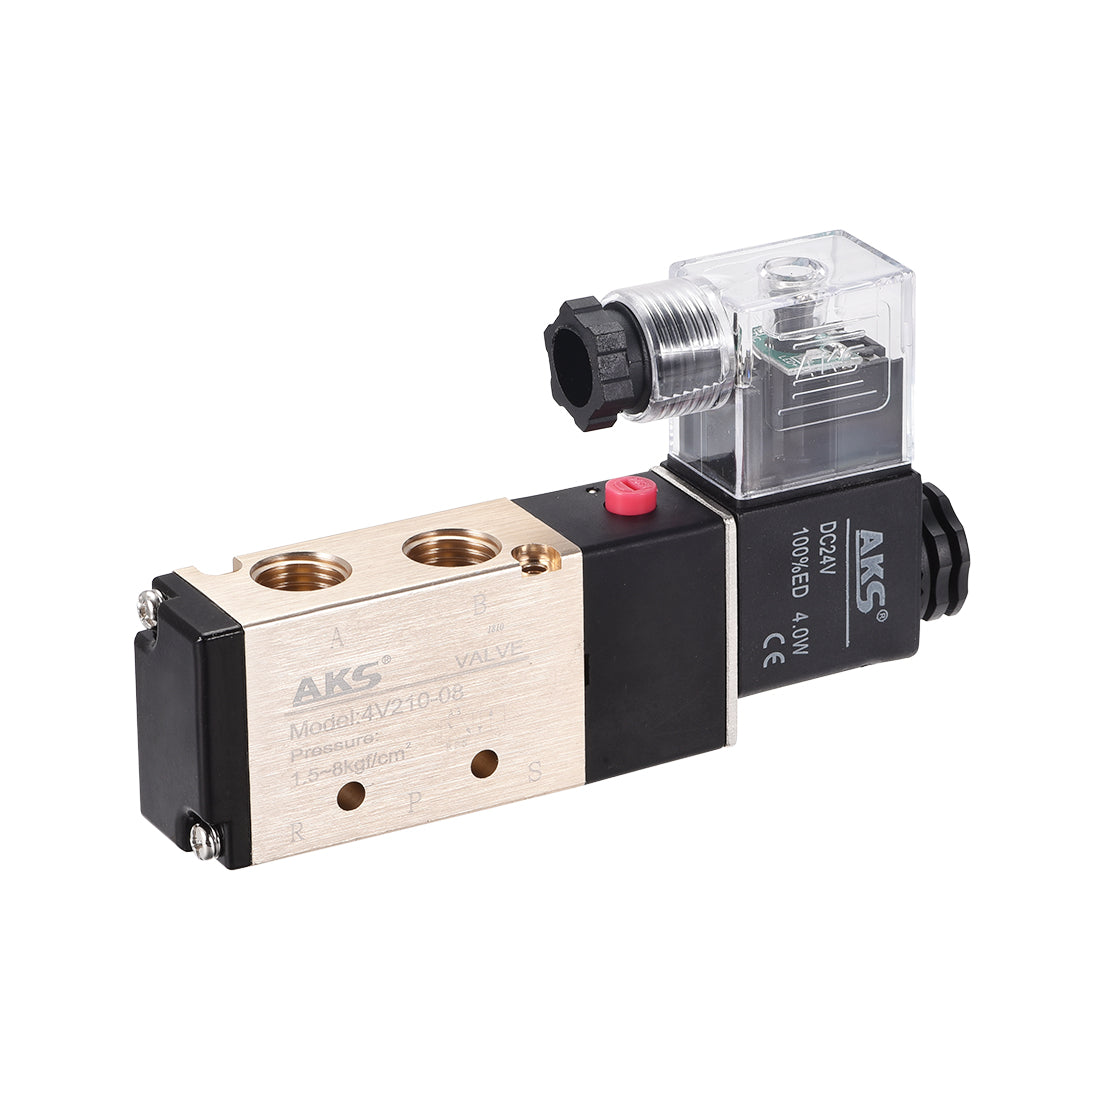 uxcell Uxcell 4V210-08 Pneumatic Air Single Electrical Control Solenoid Valve DC 24V 5 Way 2 Position 1/4" G  Thread Internally Piloted Acting Type